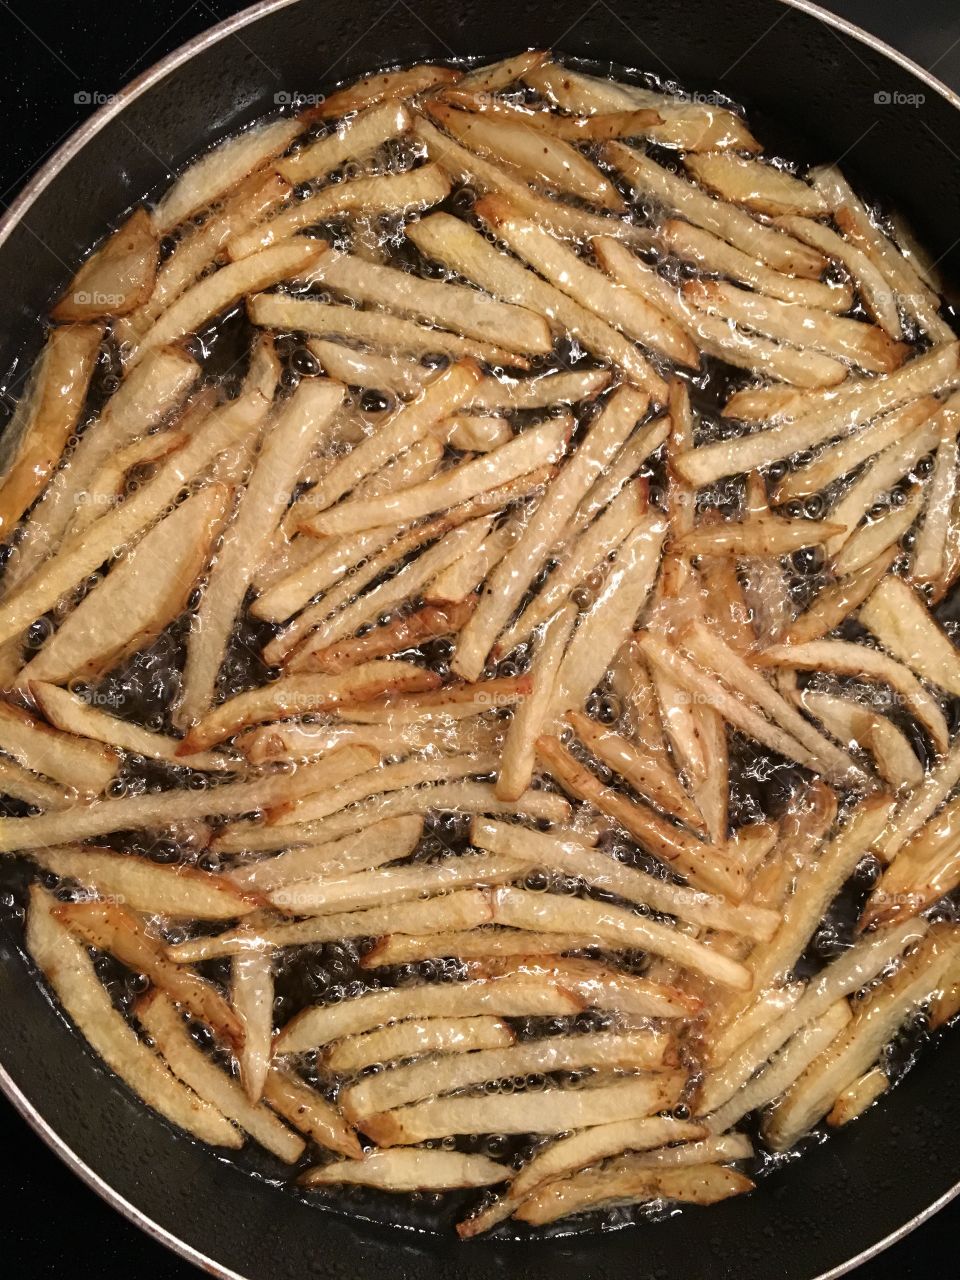 Cooking fries